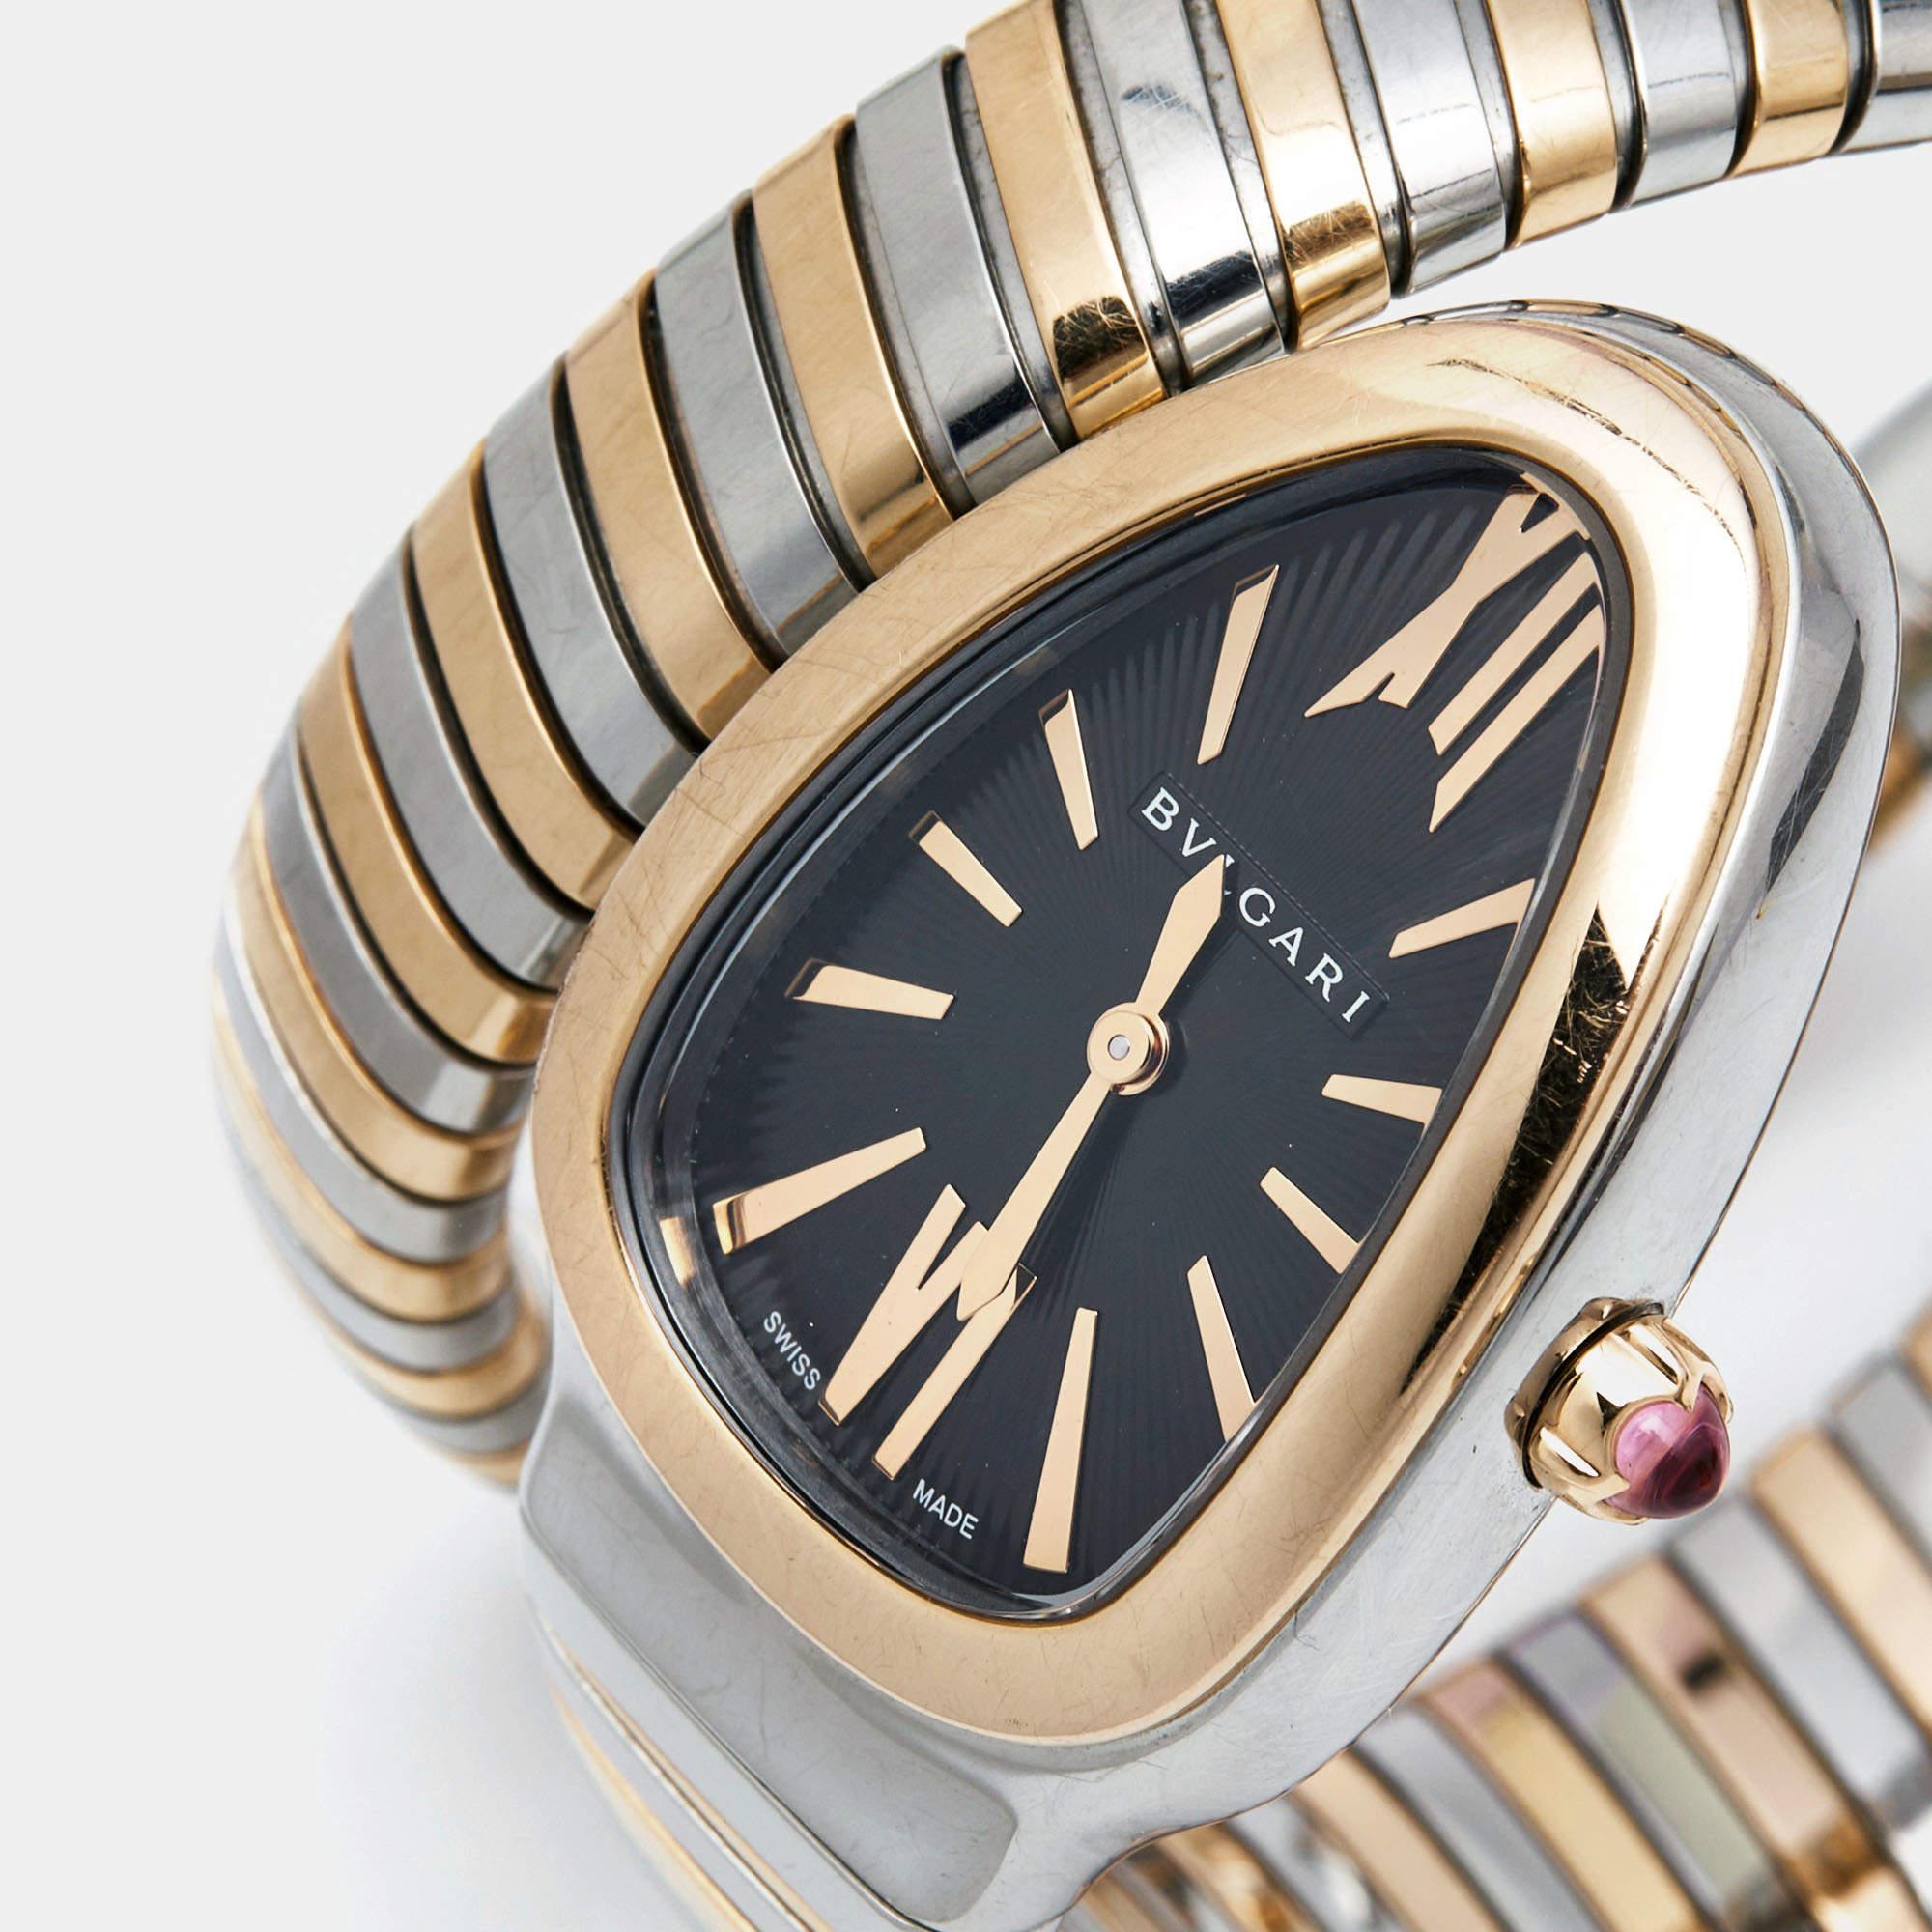 With a tasteful and decadent design, this stunning Bvlgari Serpenti Tubogas wristwatch is a beauty. The spiraled stainless steel and 18k rose gold body has its ends designed as the head and tail of a serpent. Wearable and glamorous, the flexible